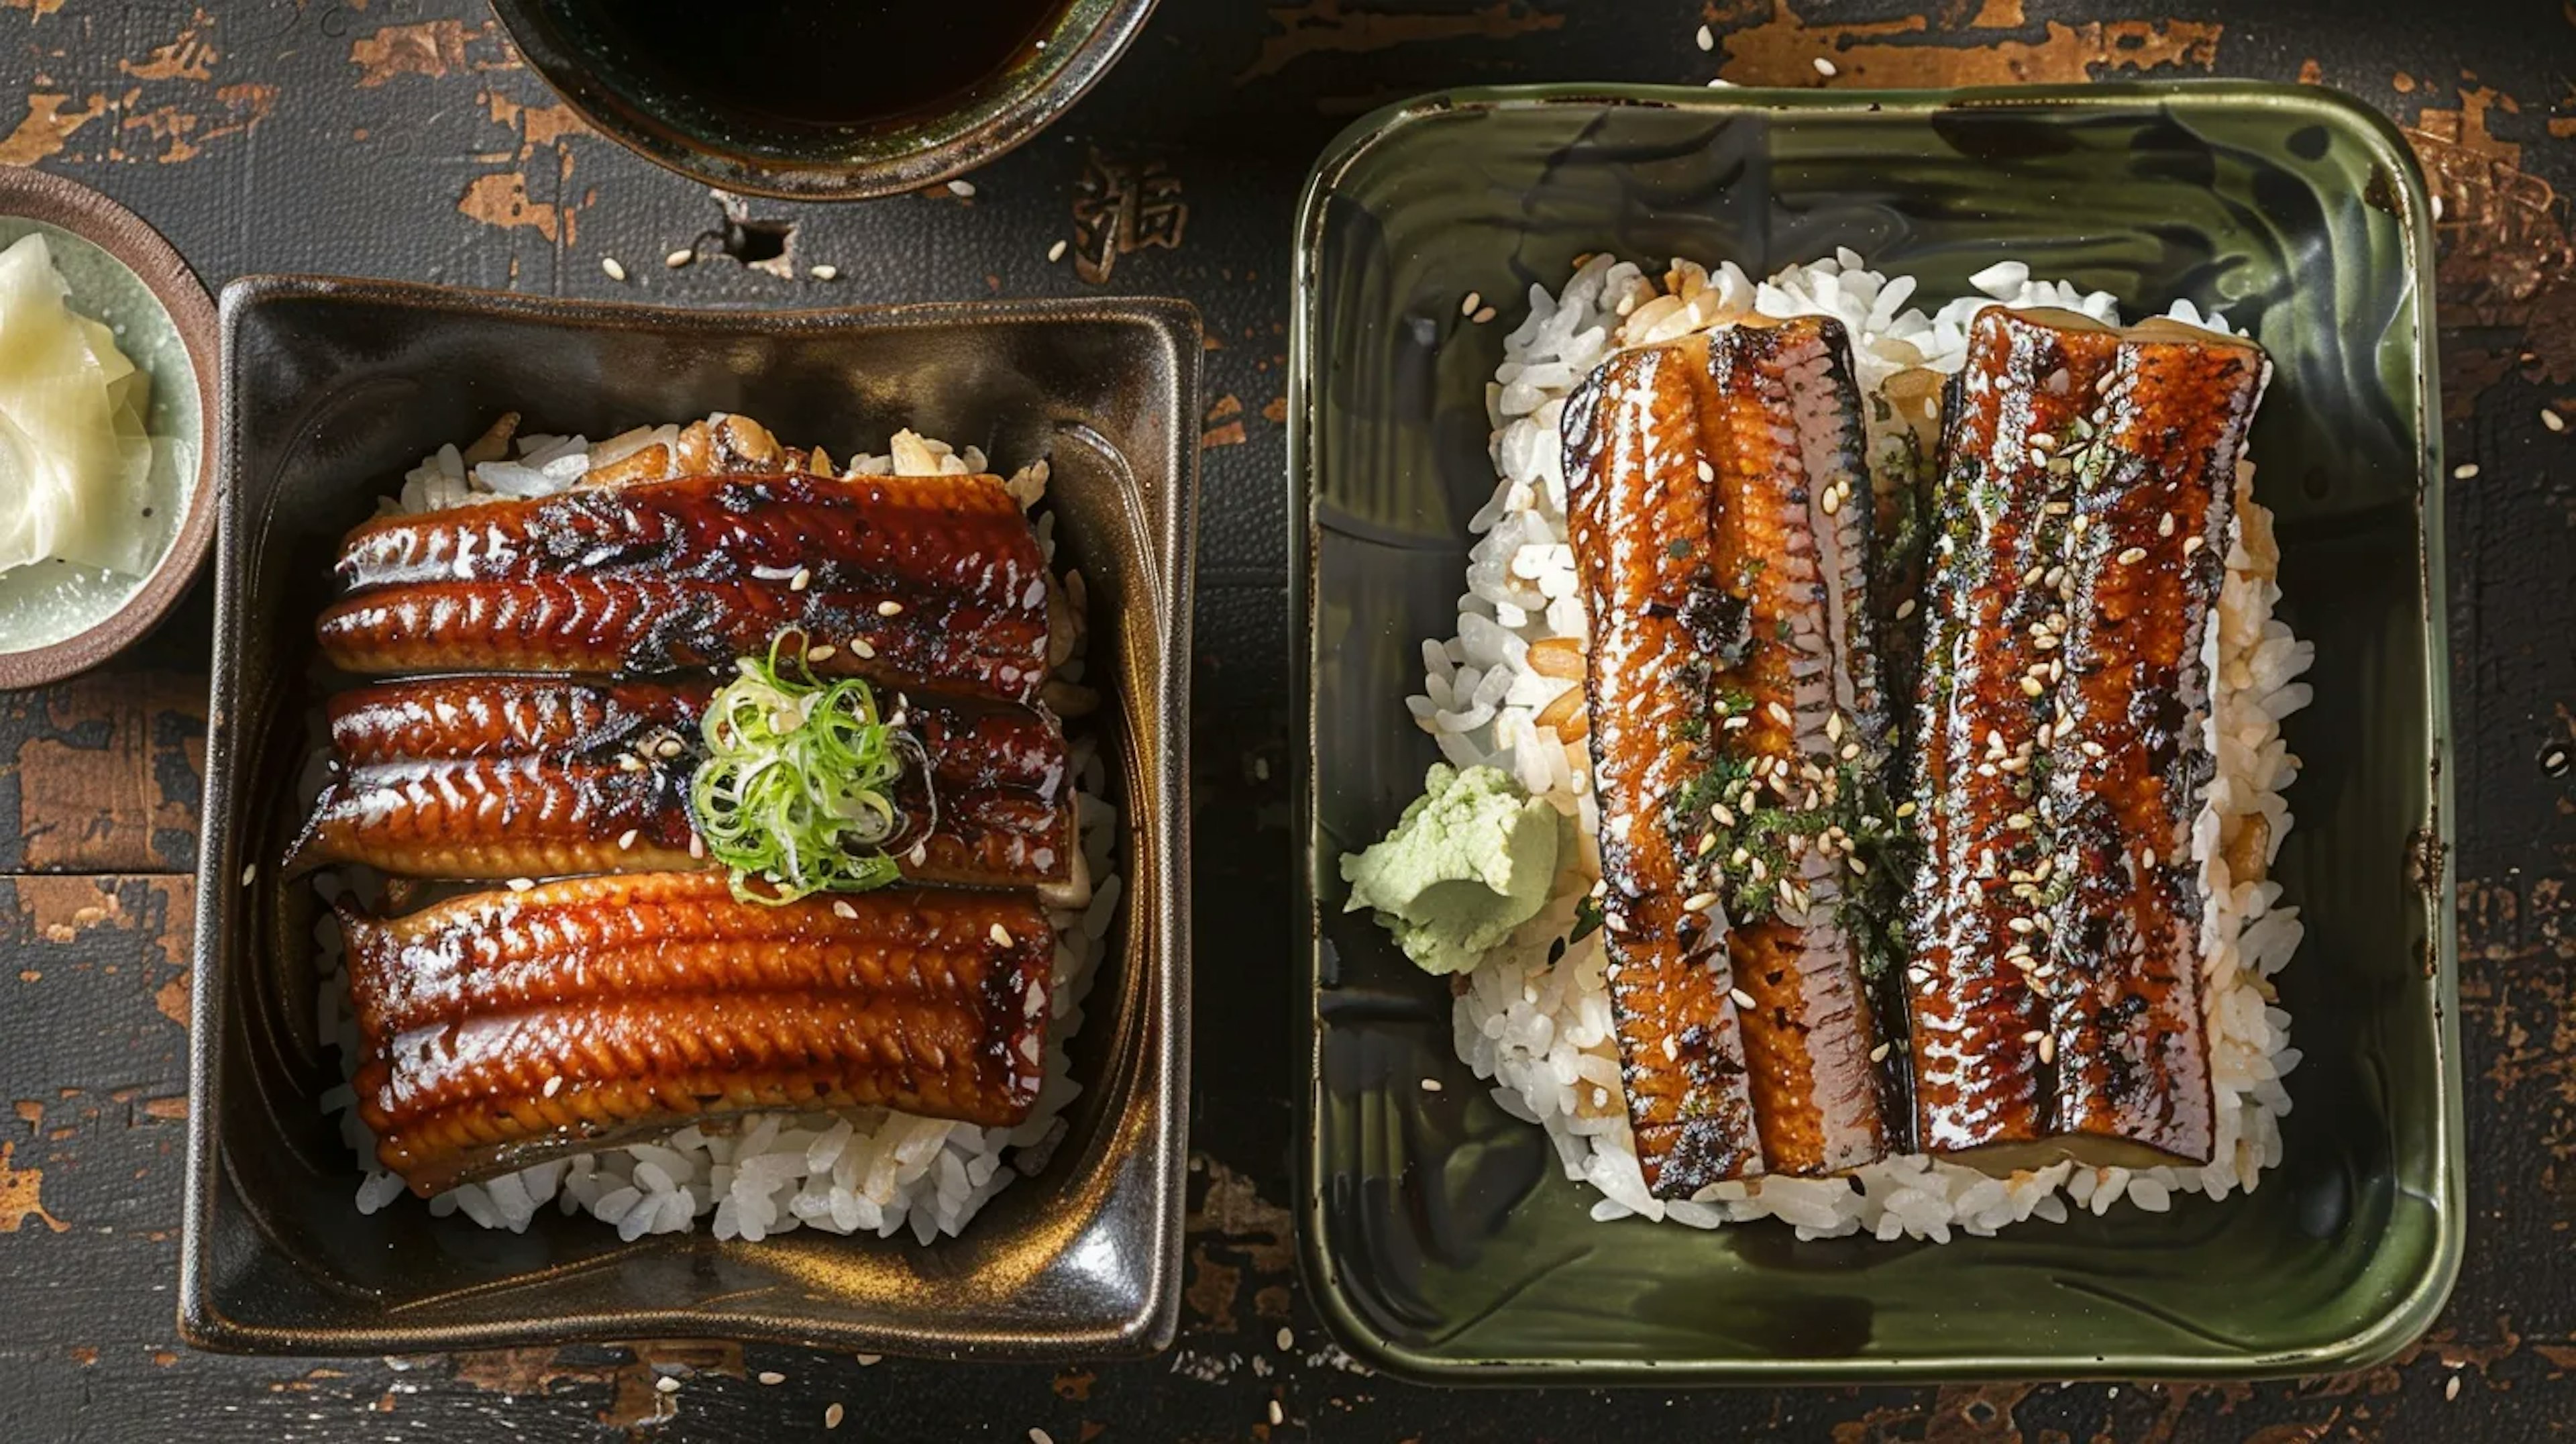 Side-by-side comparison of Unagi and Anago dishes, highlighting their visual and textural differences in Japanese cuisine